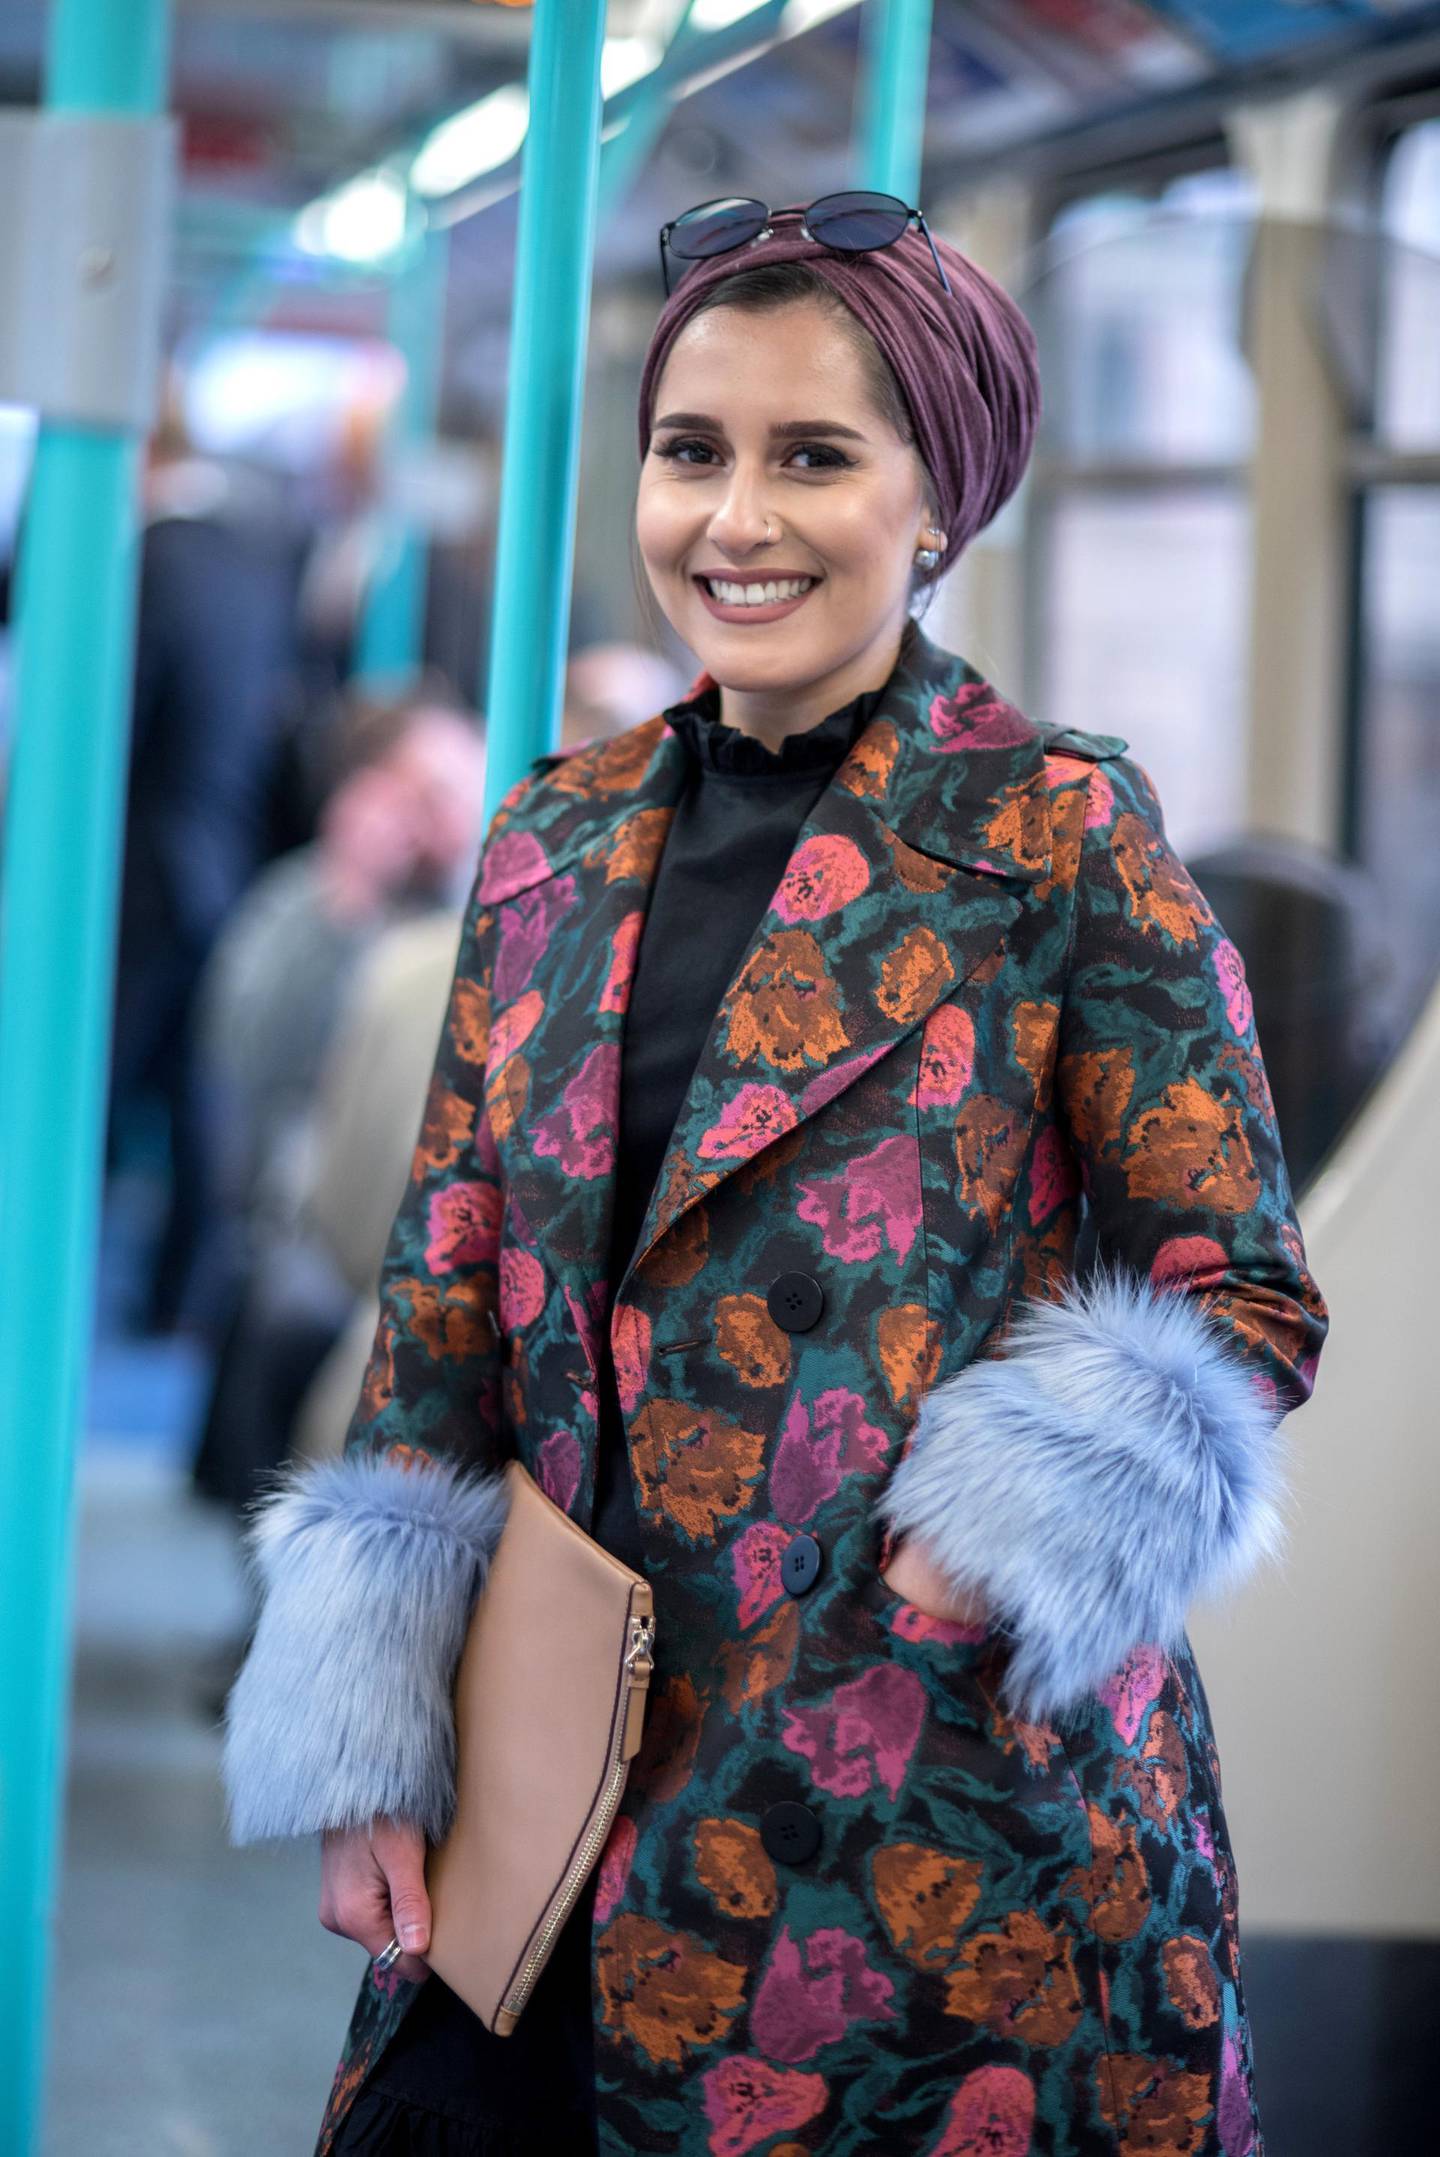 British-Muslim fashion blogger Dina Torkia decided to stop wearing the hijab full-time to much criticism. Photo: Rooful Ali.